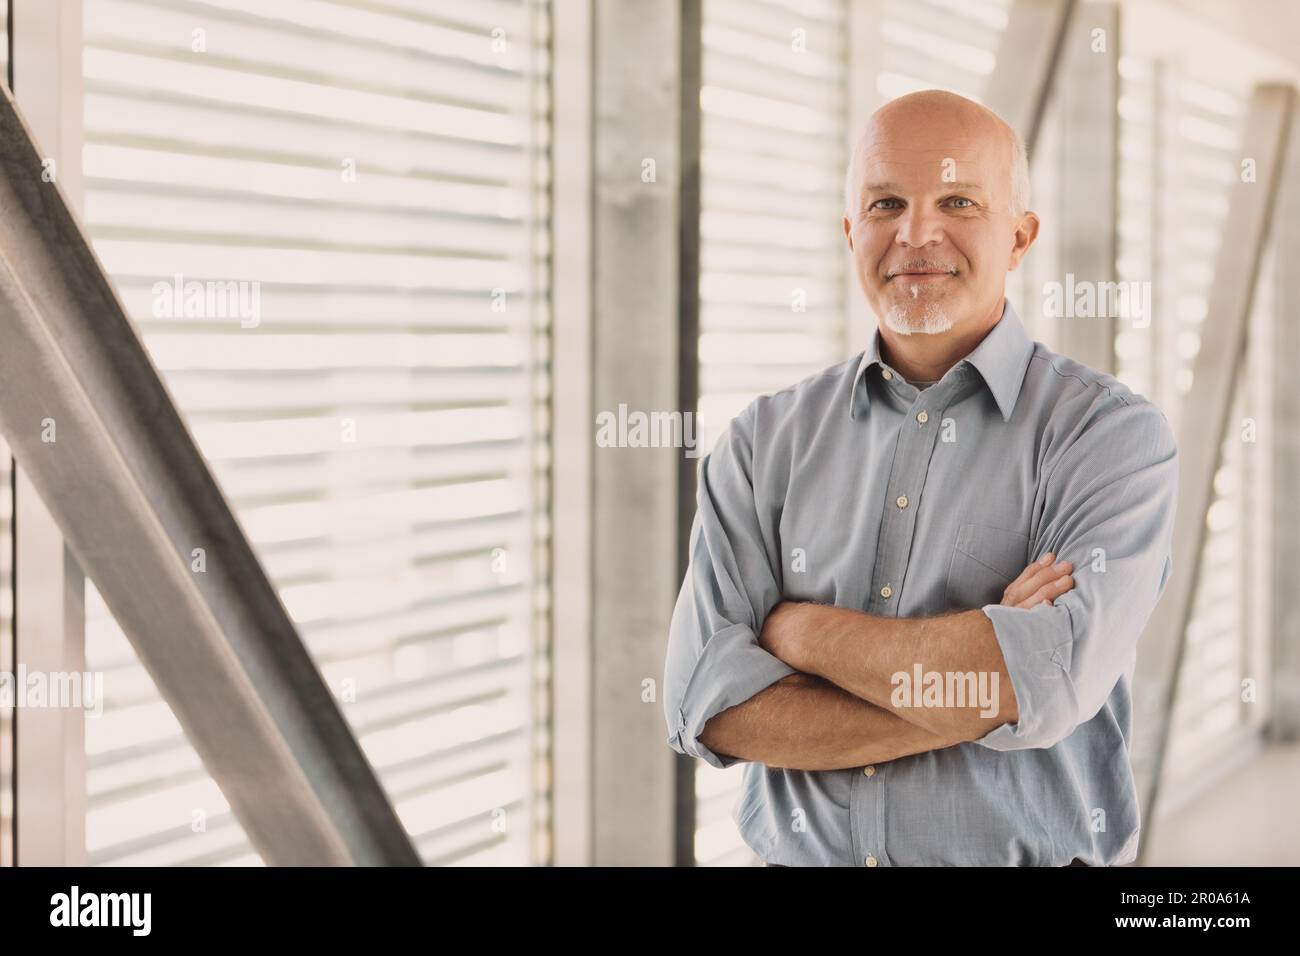 Old man in modern place smiles and thinks. He could at any time take charge of his life and change everything, because he fears nothing. he is ready f Stock Photo